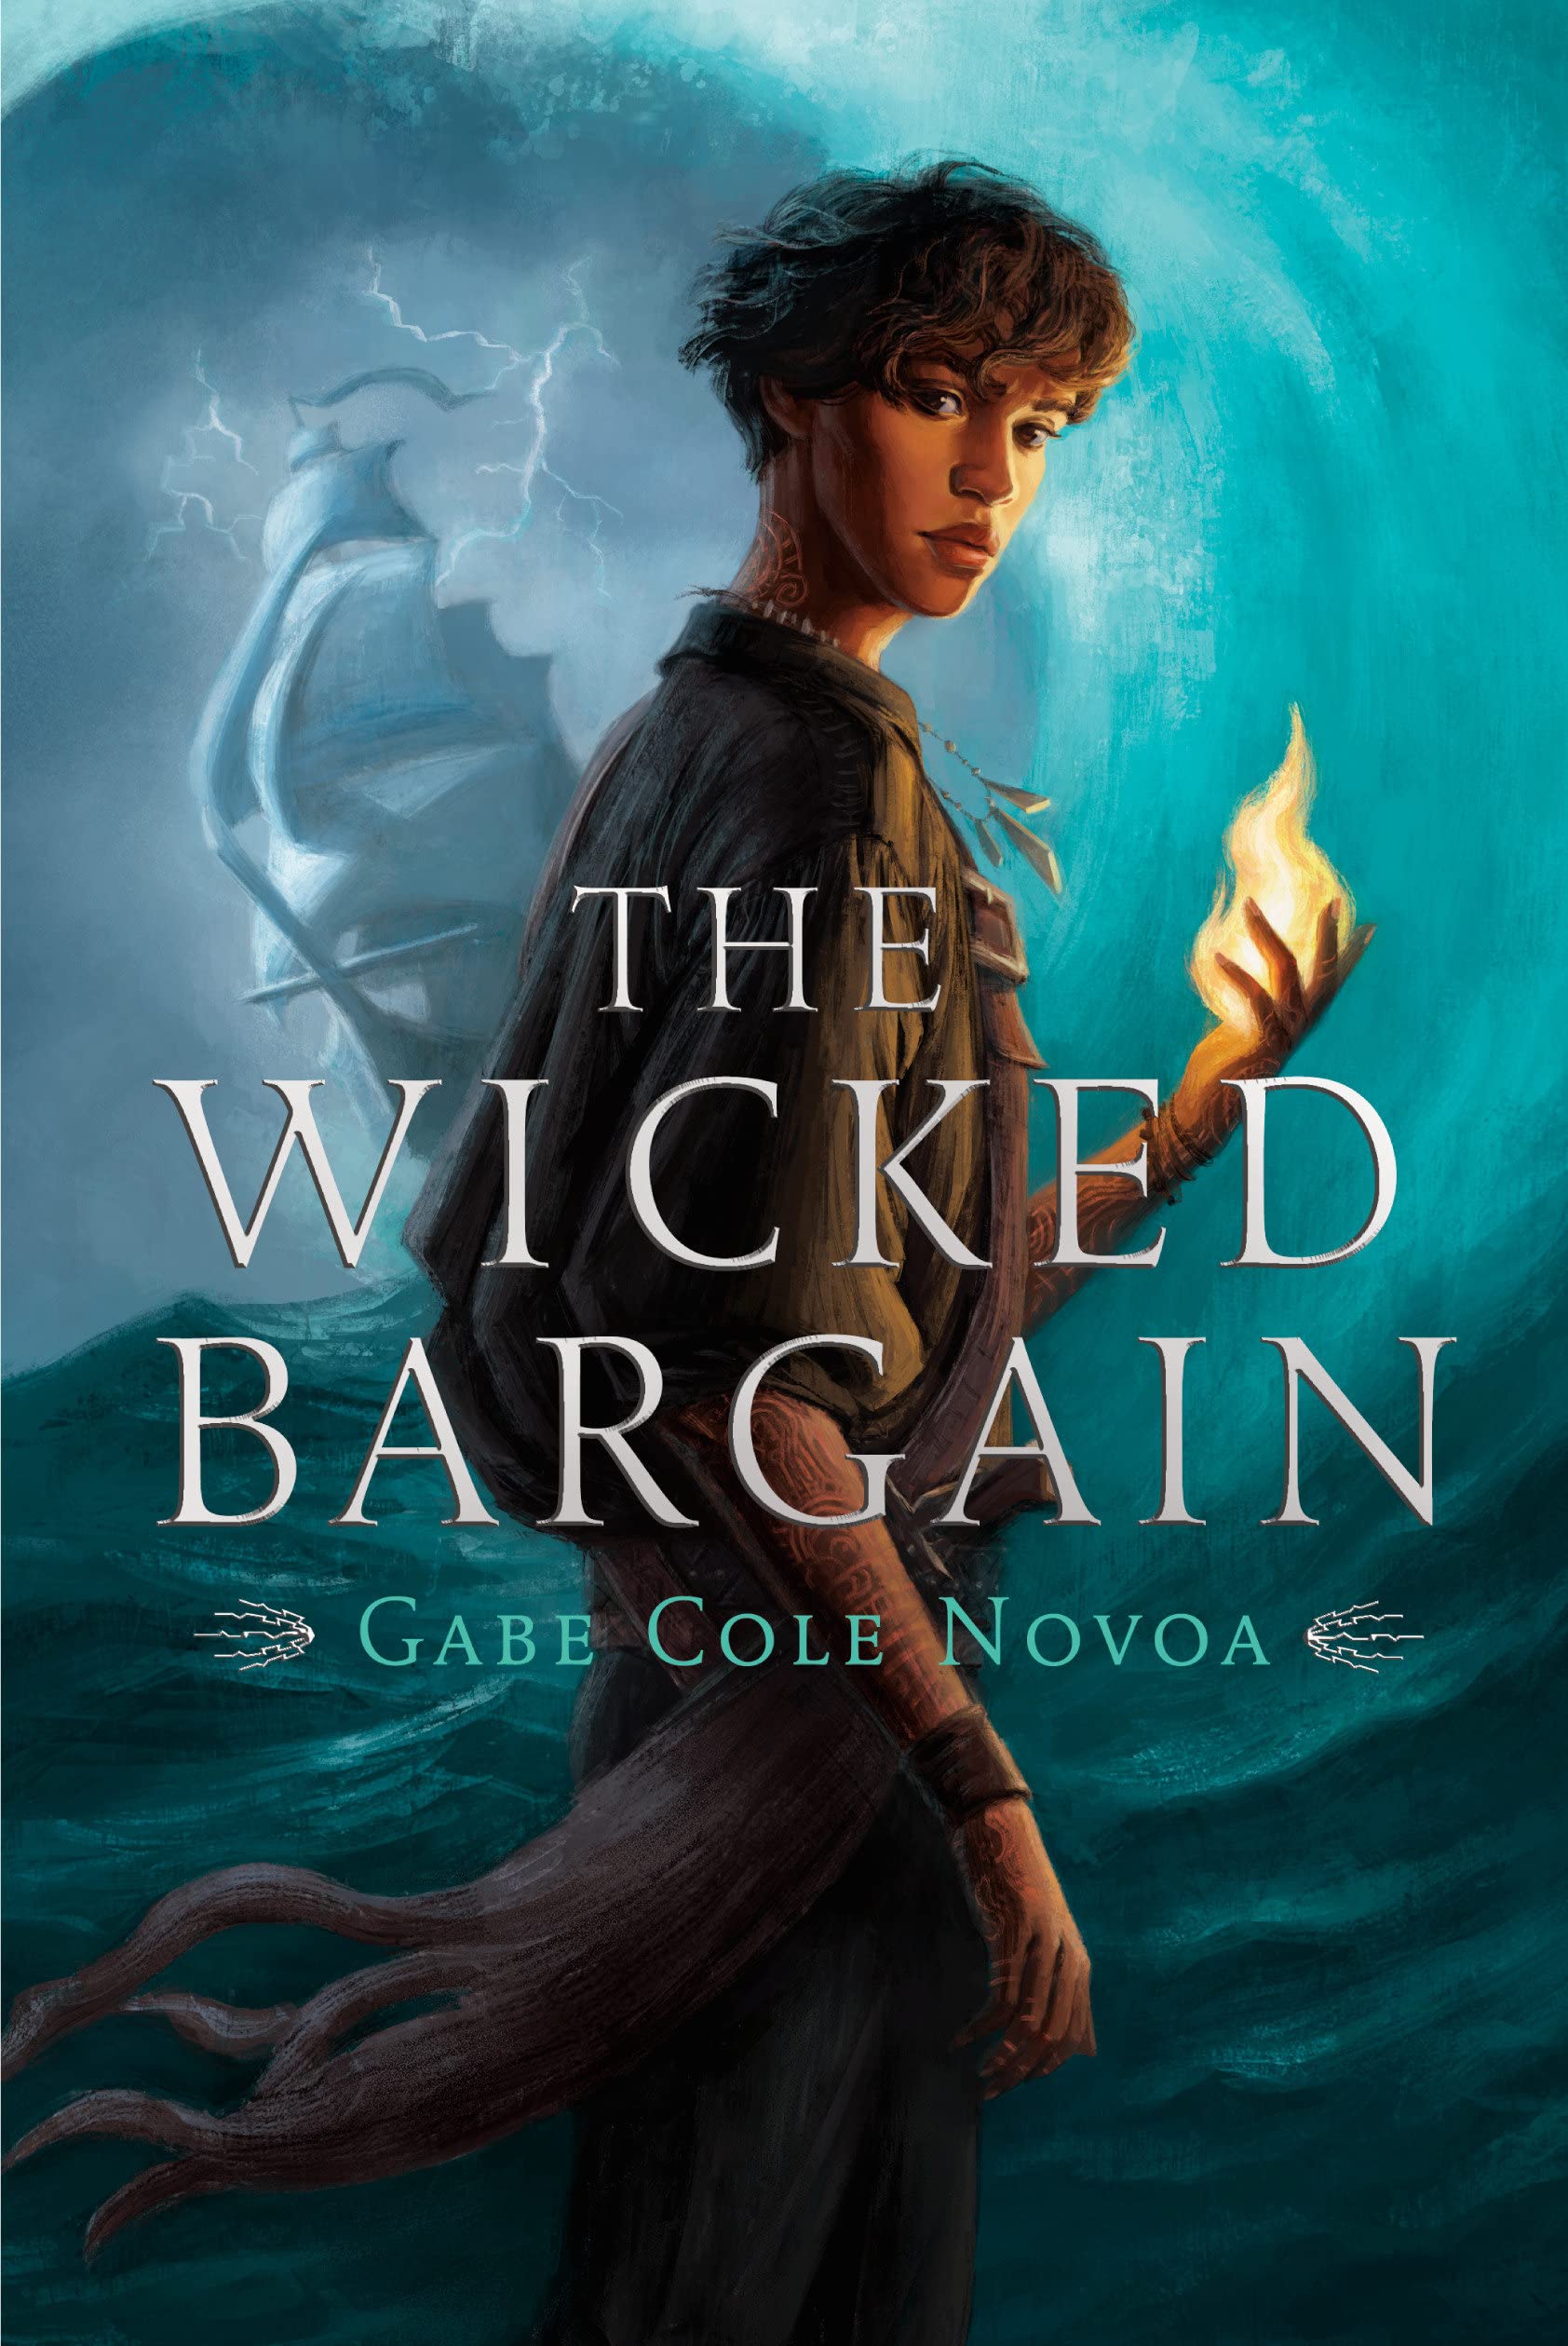 Book cover for The Wicked Bargain